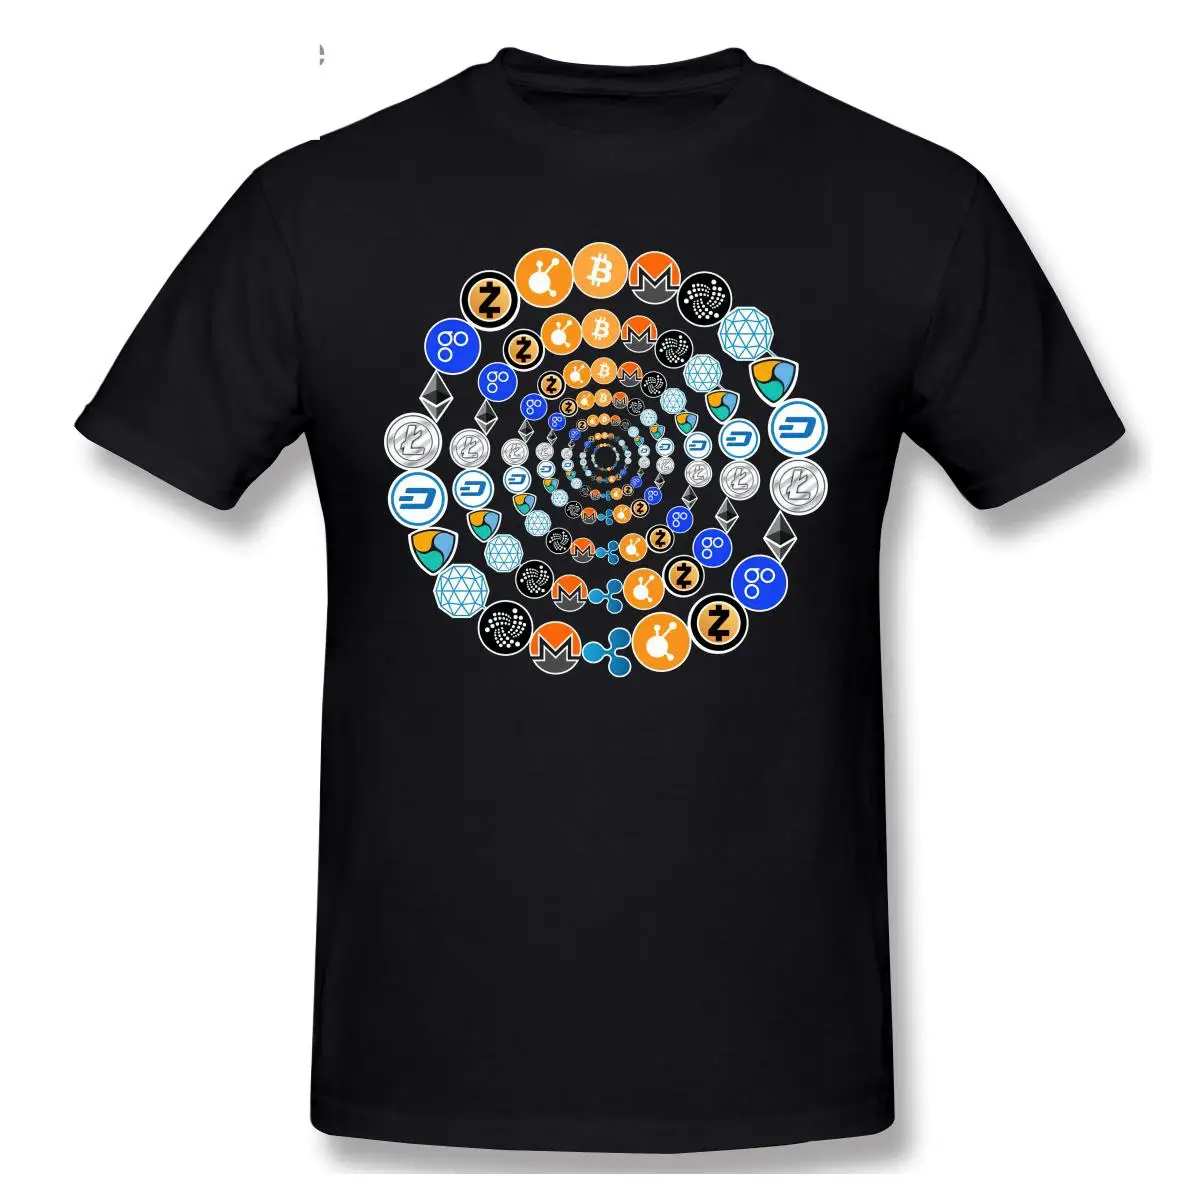 

Cryptocurrency T-shirt Ethereum Bitcoin Litecoin Crypto Set Crypto Network Blockchain Technology OmiseGo Qtum T-Shirt Tee Tops